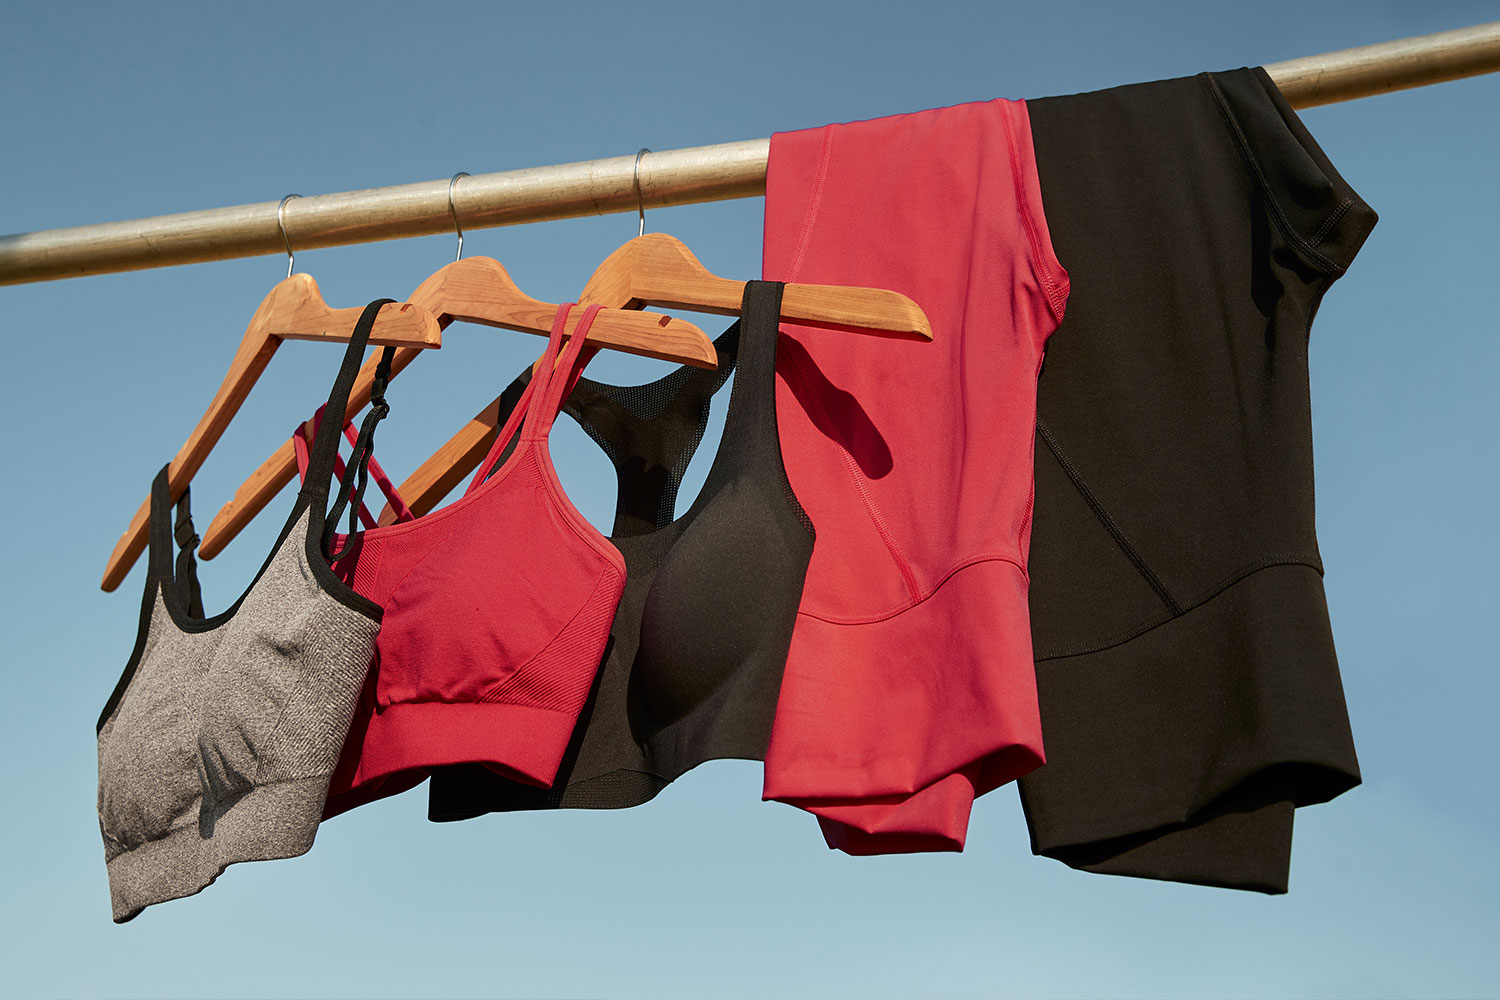 Soma<sup class=st-superscript>®</sup> women’s red and black sports bras and leggings hanging on a rack.